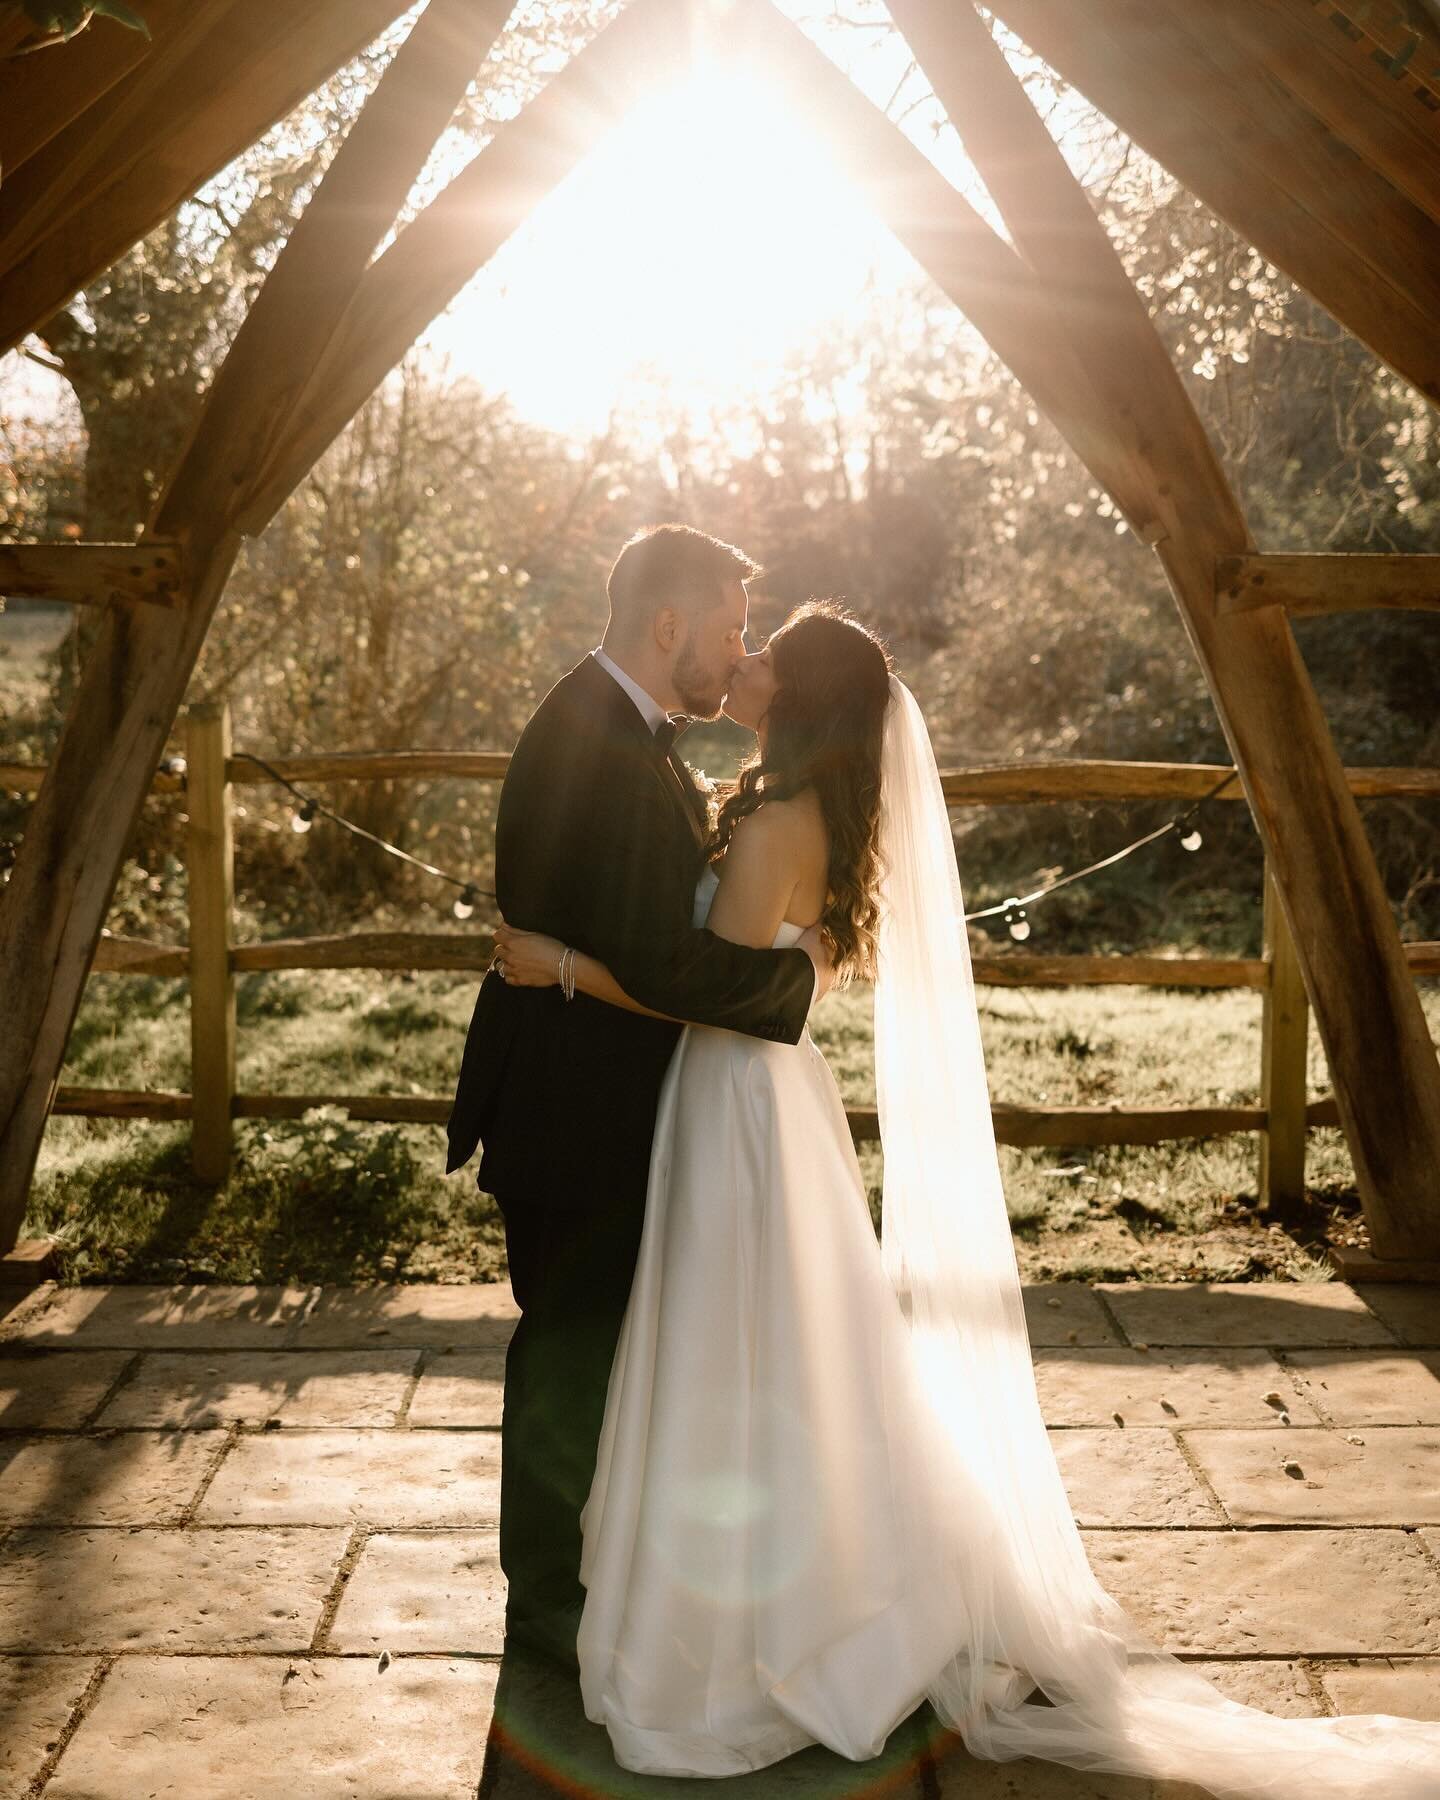 The lovely Sammie and Tom captured at their spring wedding at @millbridgecourt as the sun began to set 🧡✨

Hair &amp; make up @lolaandco.co.uk 
Event styling @ambiencevenuestylingsurrey 
Florals @afloral_affair 
Dress @purecouturebridal 
Cake @sammi